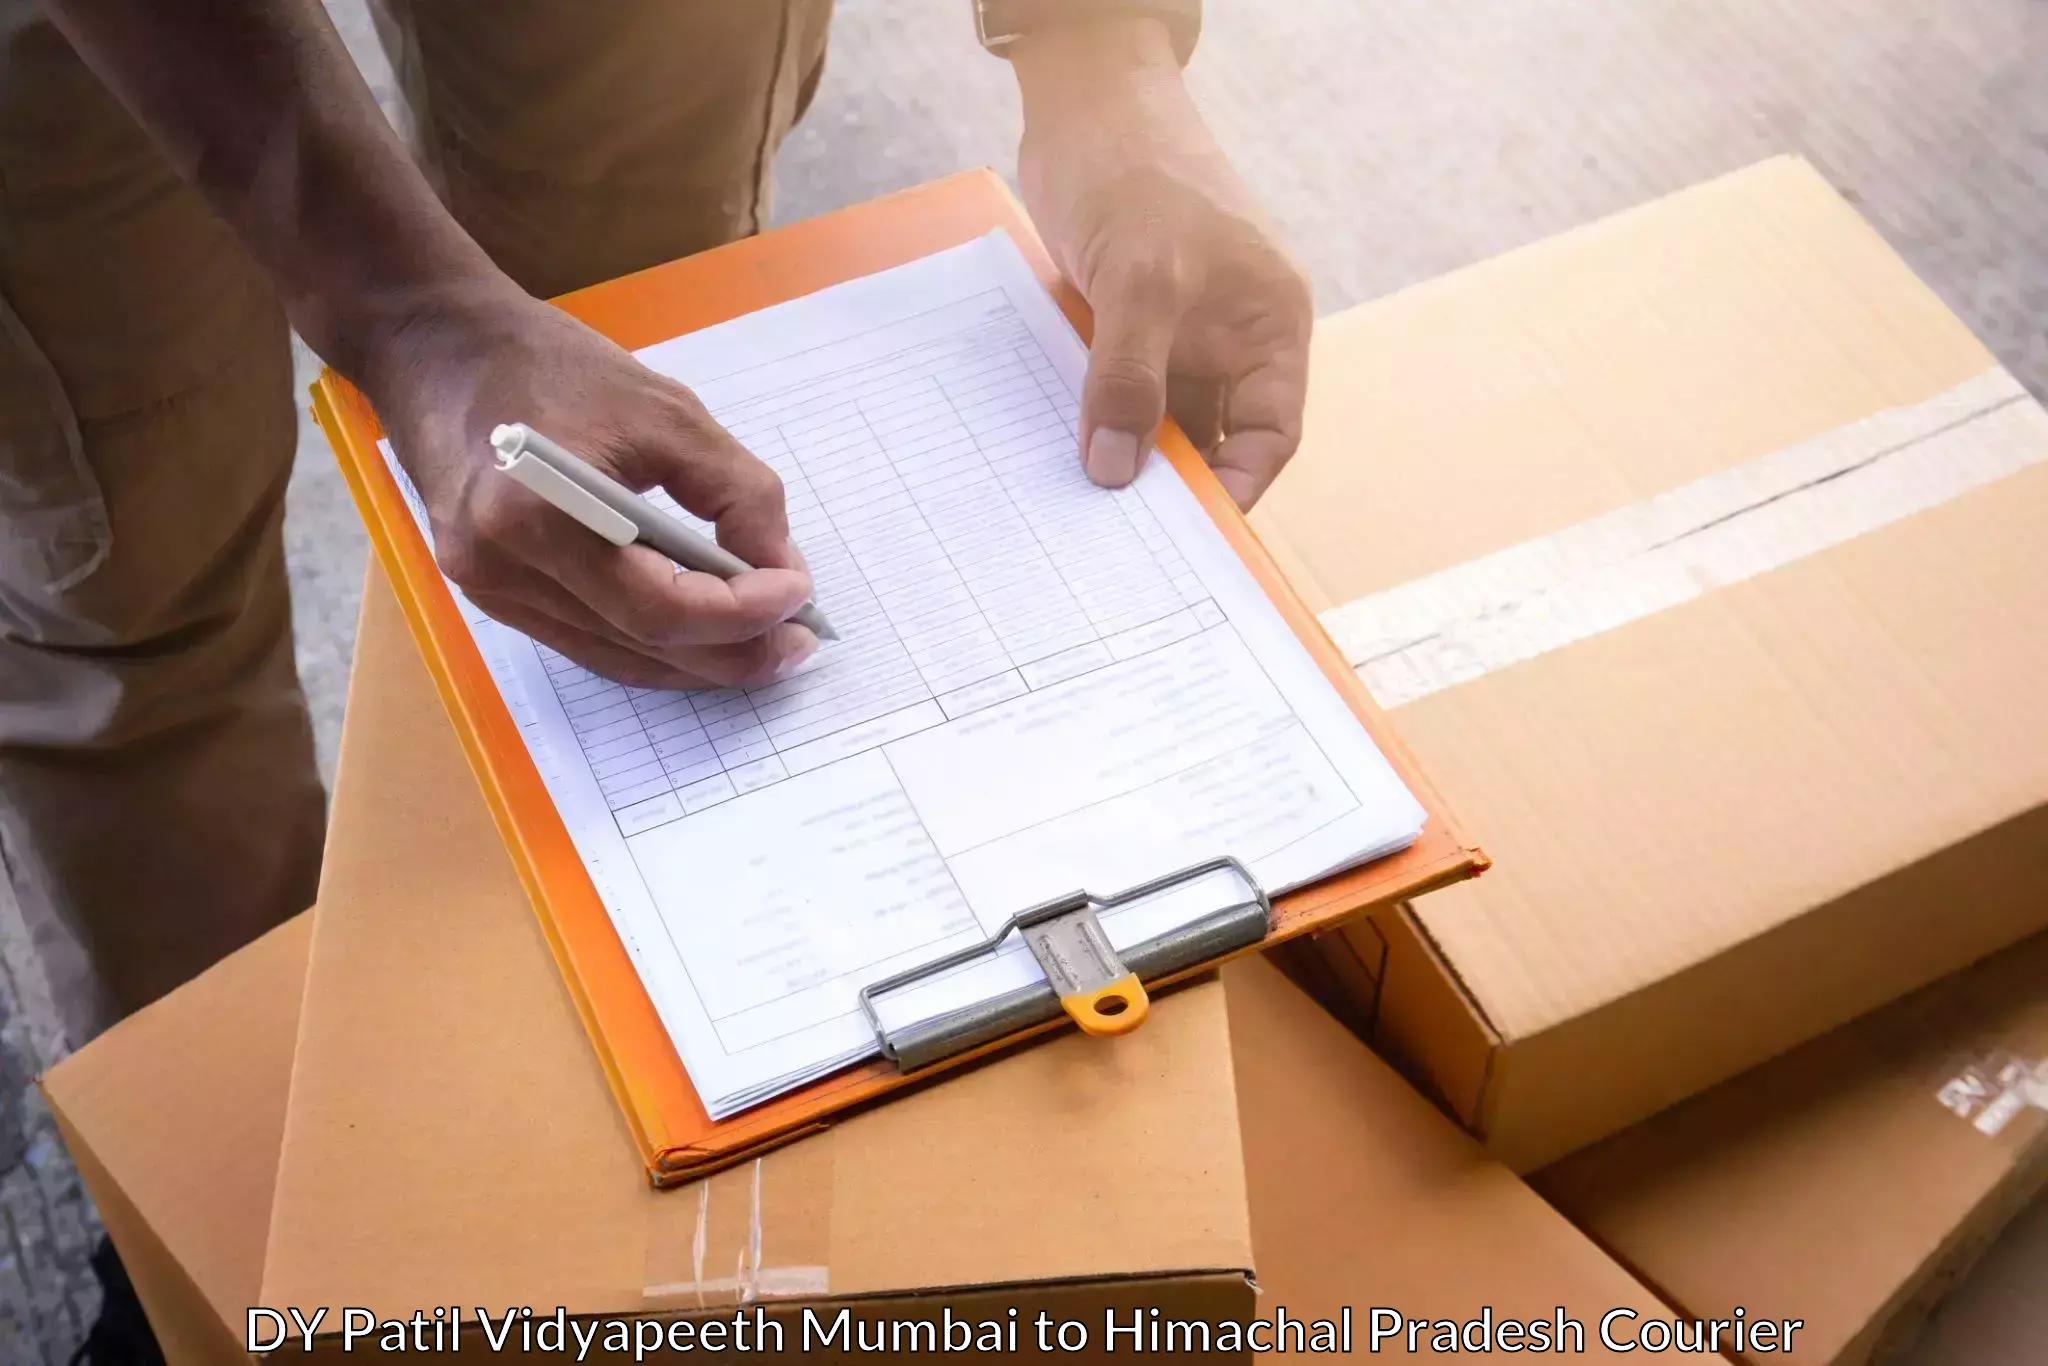 Courier dispatch services DY Patil Vidyapeeth Mumbai to Lahaul and Spiti